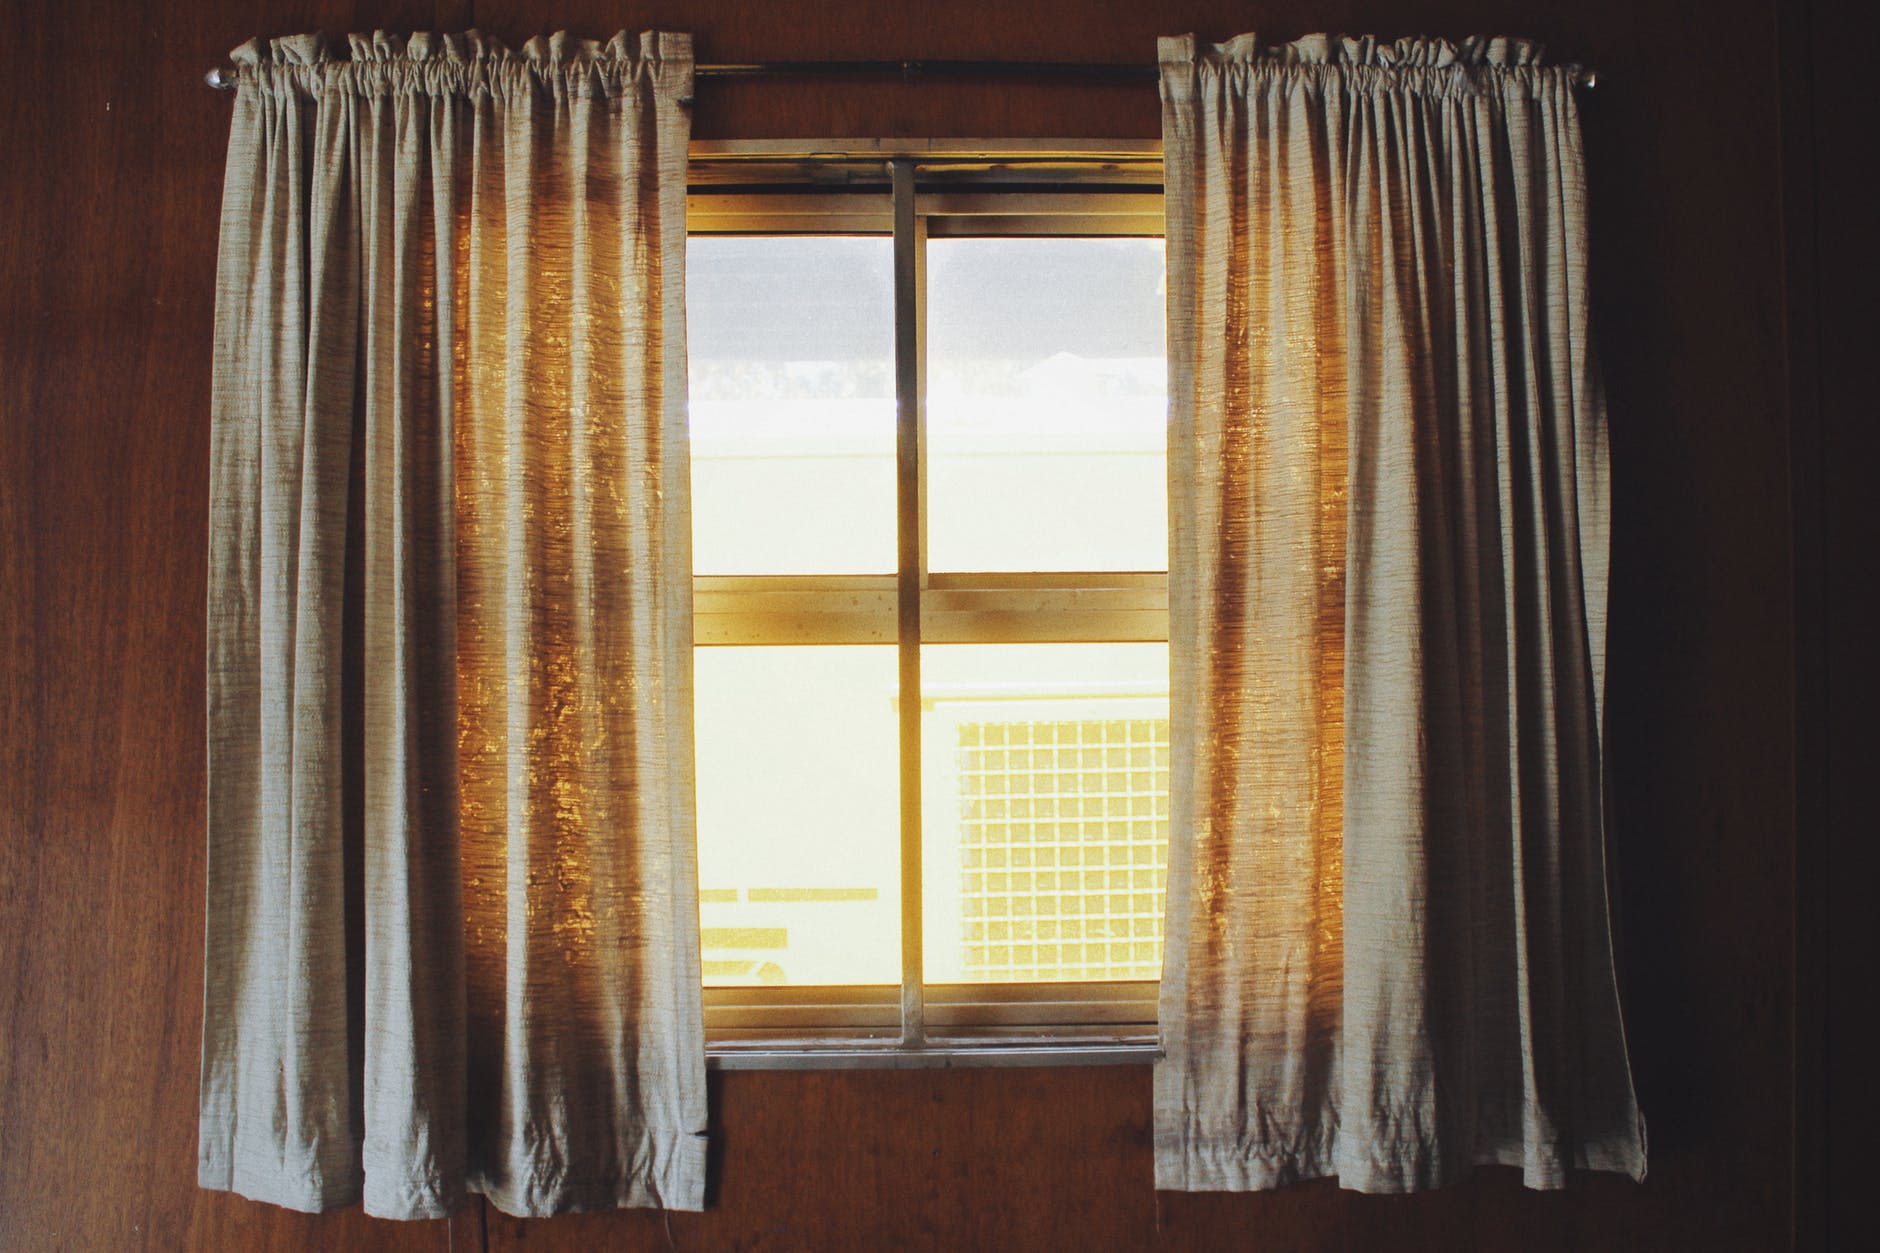 A pair of thin grey curtains hung up near a square window 